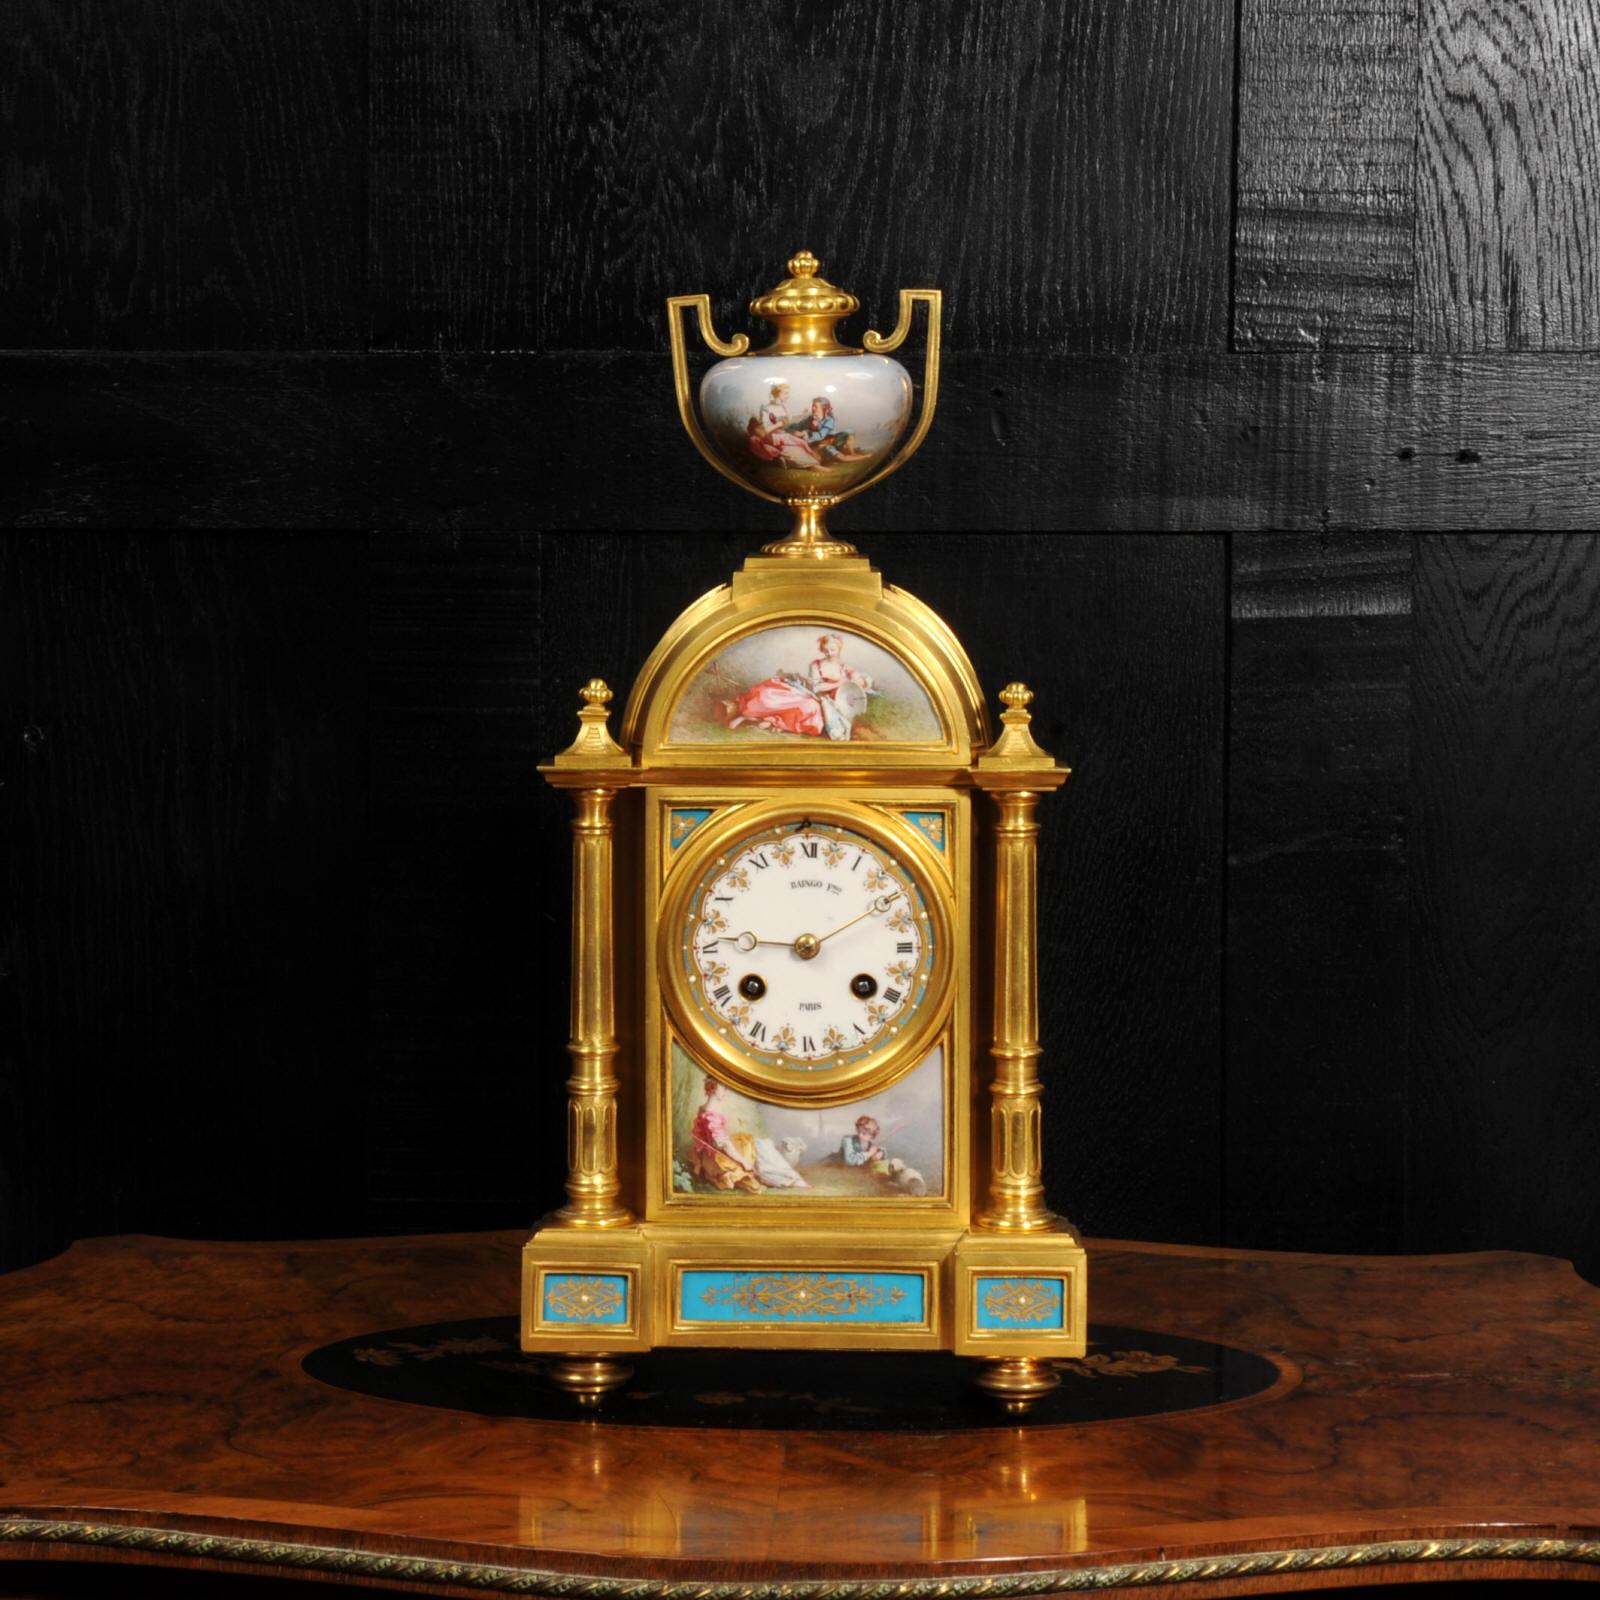 A fine and early clock, the case by Henri Picard of Paris and the movement by Raingo Frères. It is beautifully made of ormolu (mercury fire gilded bronze doré) mounted with exquisitely painted Sèvres style porcelain with a Bleu Celeste ground. The